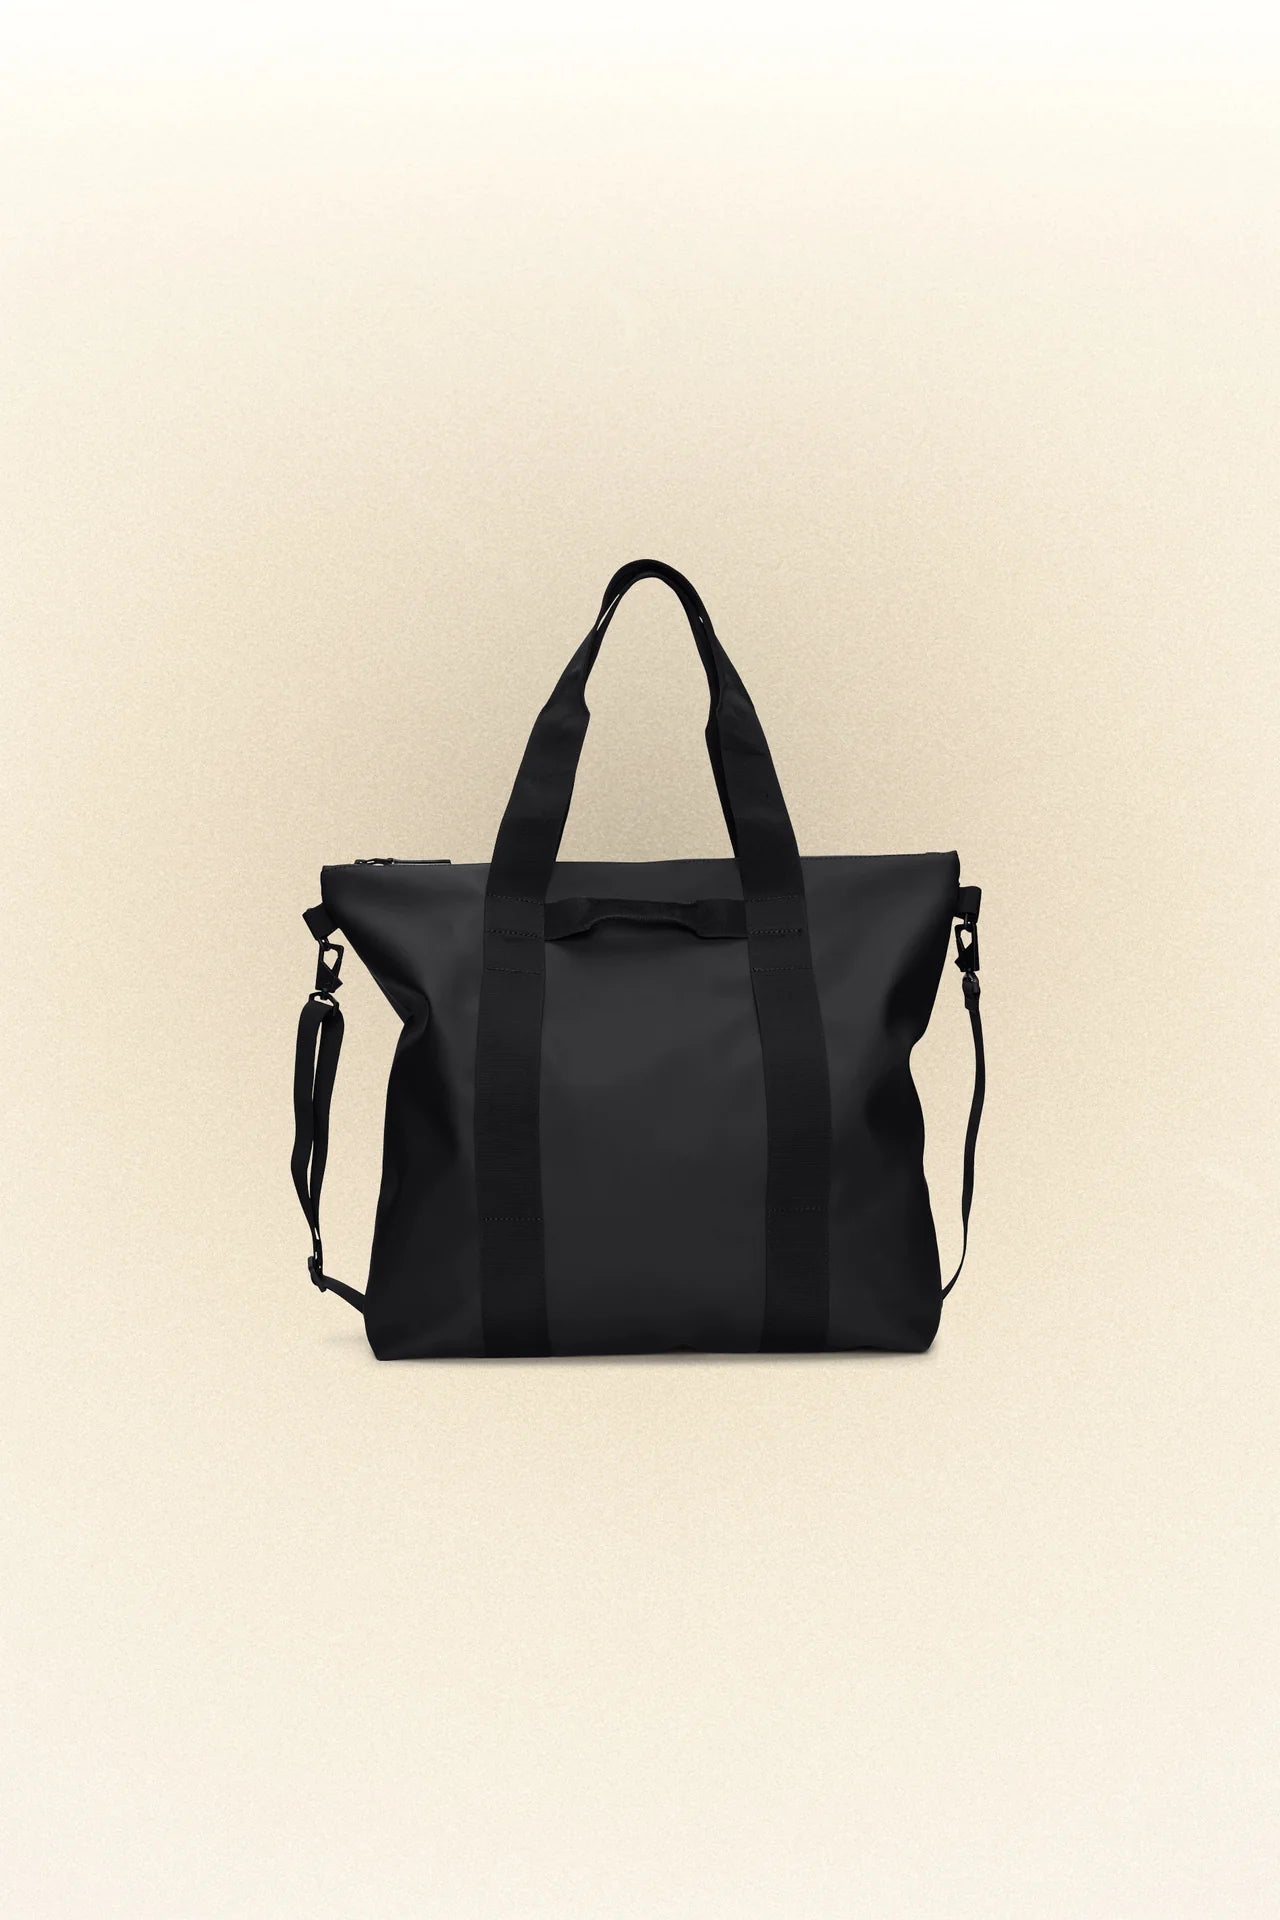 A Rains black waterproof tote bag on a white background.